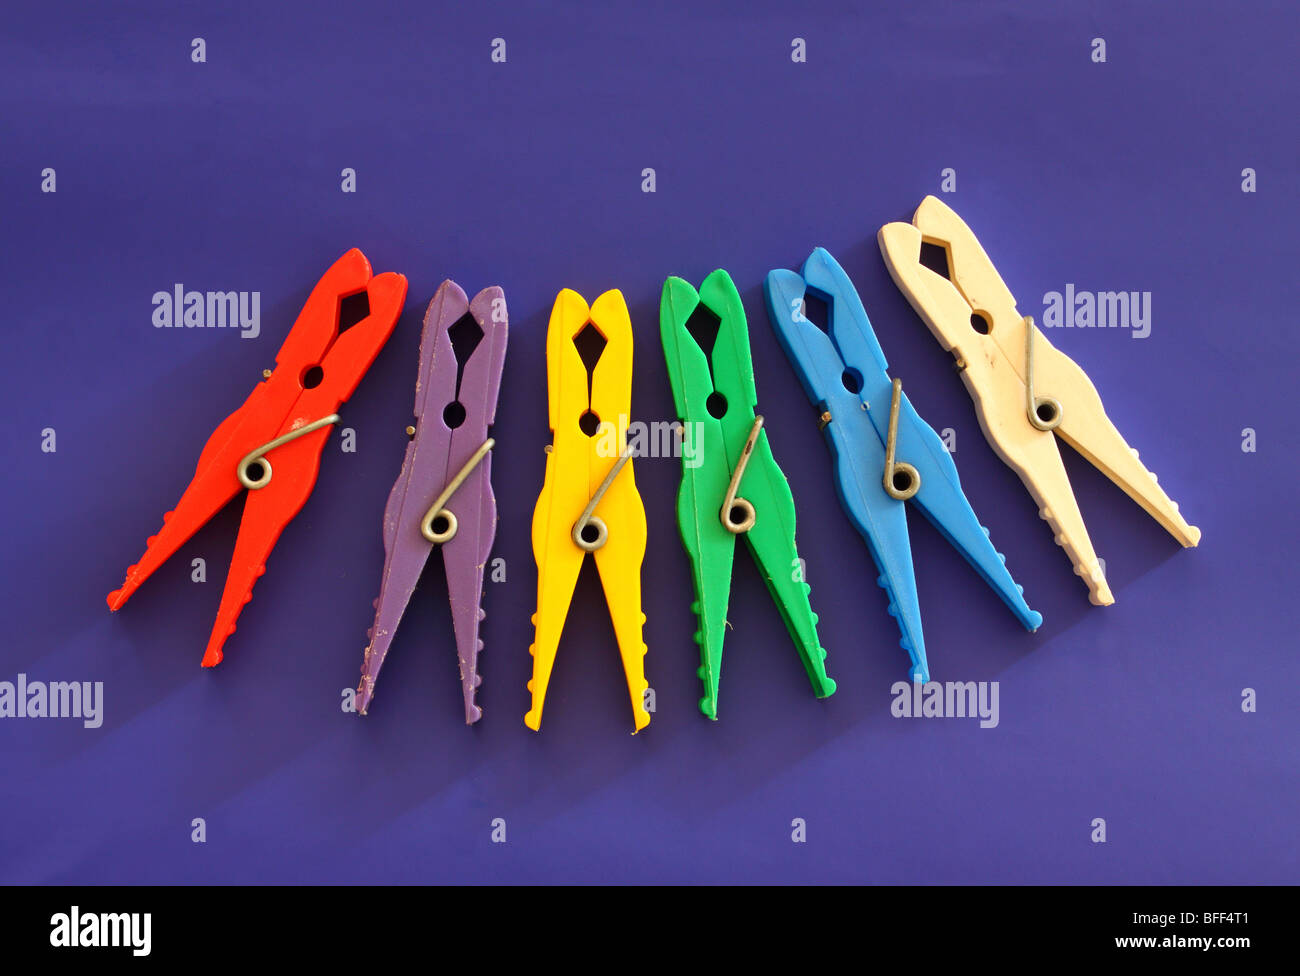 Multicolor laundry clips on blue background Stock Photo